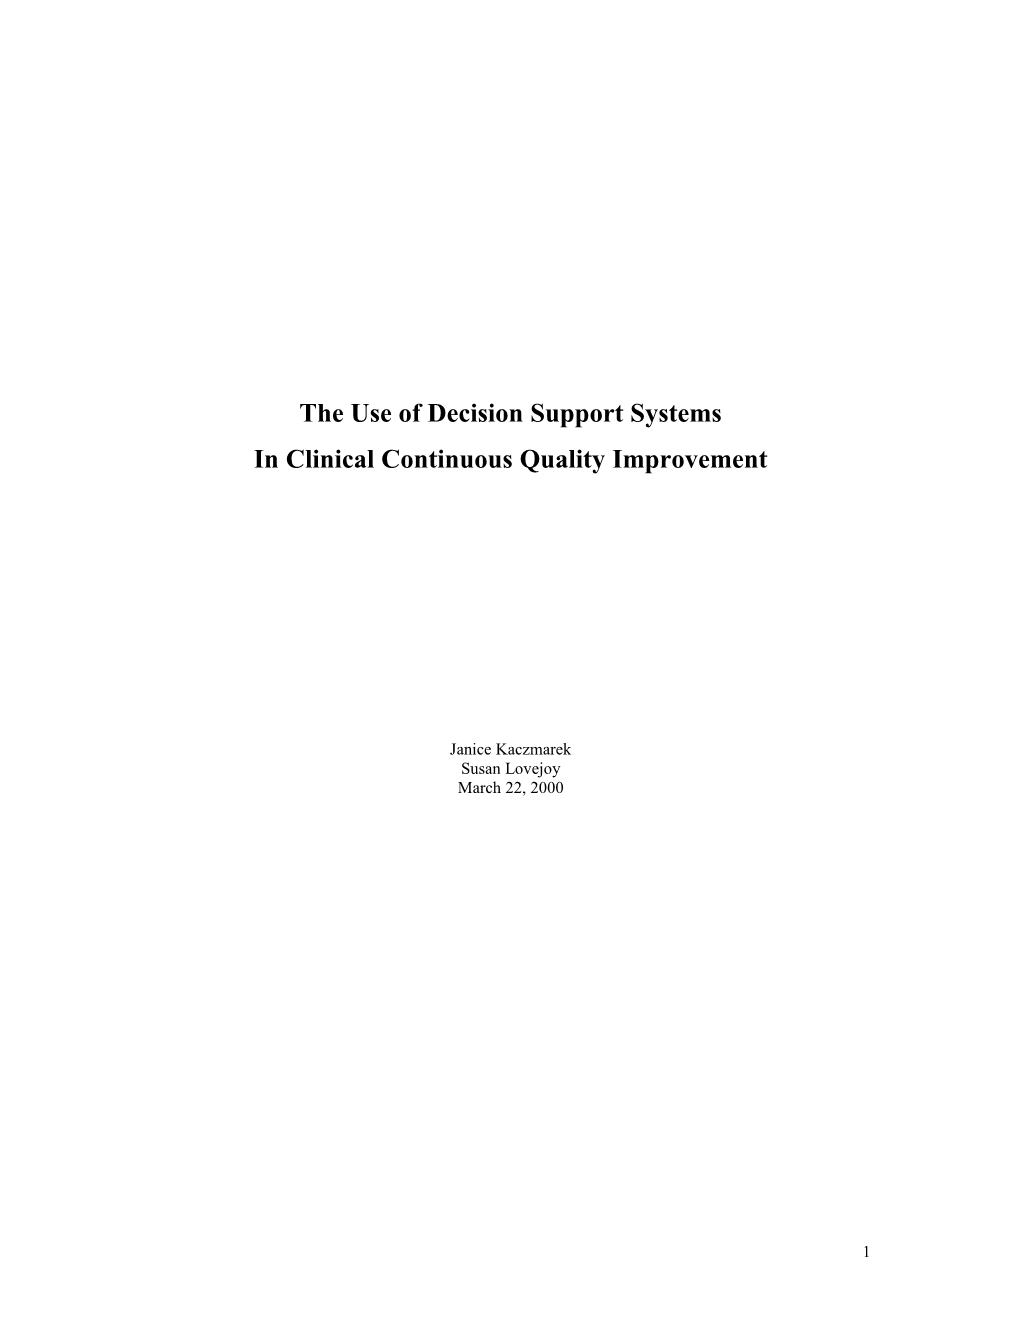 In Clinical Continuous Quality Improvement